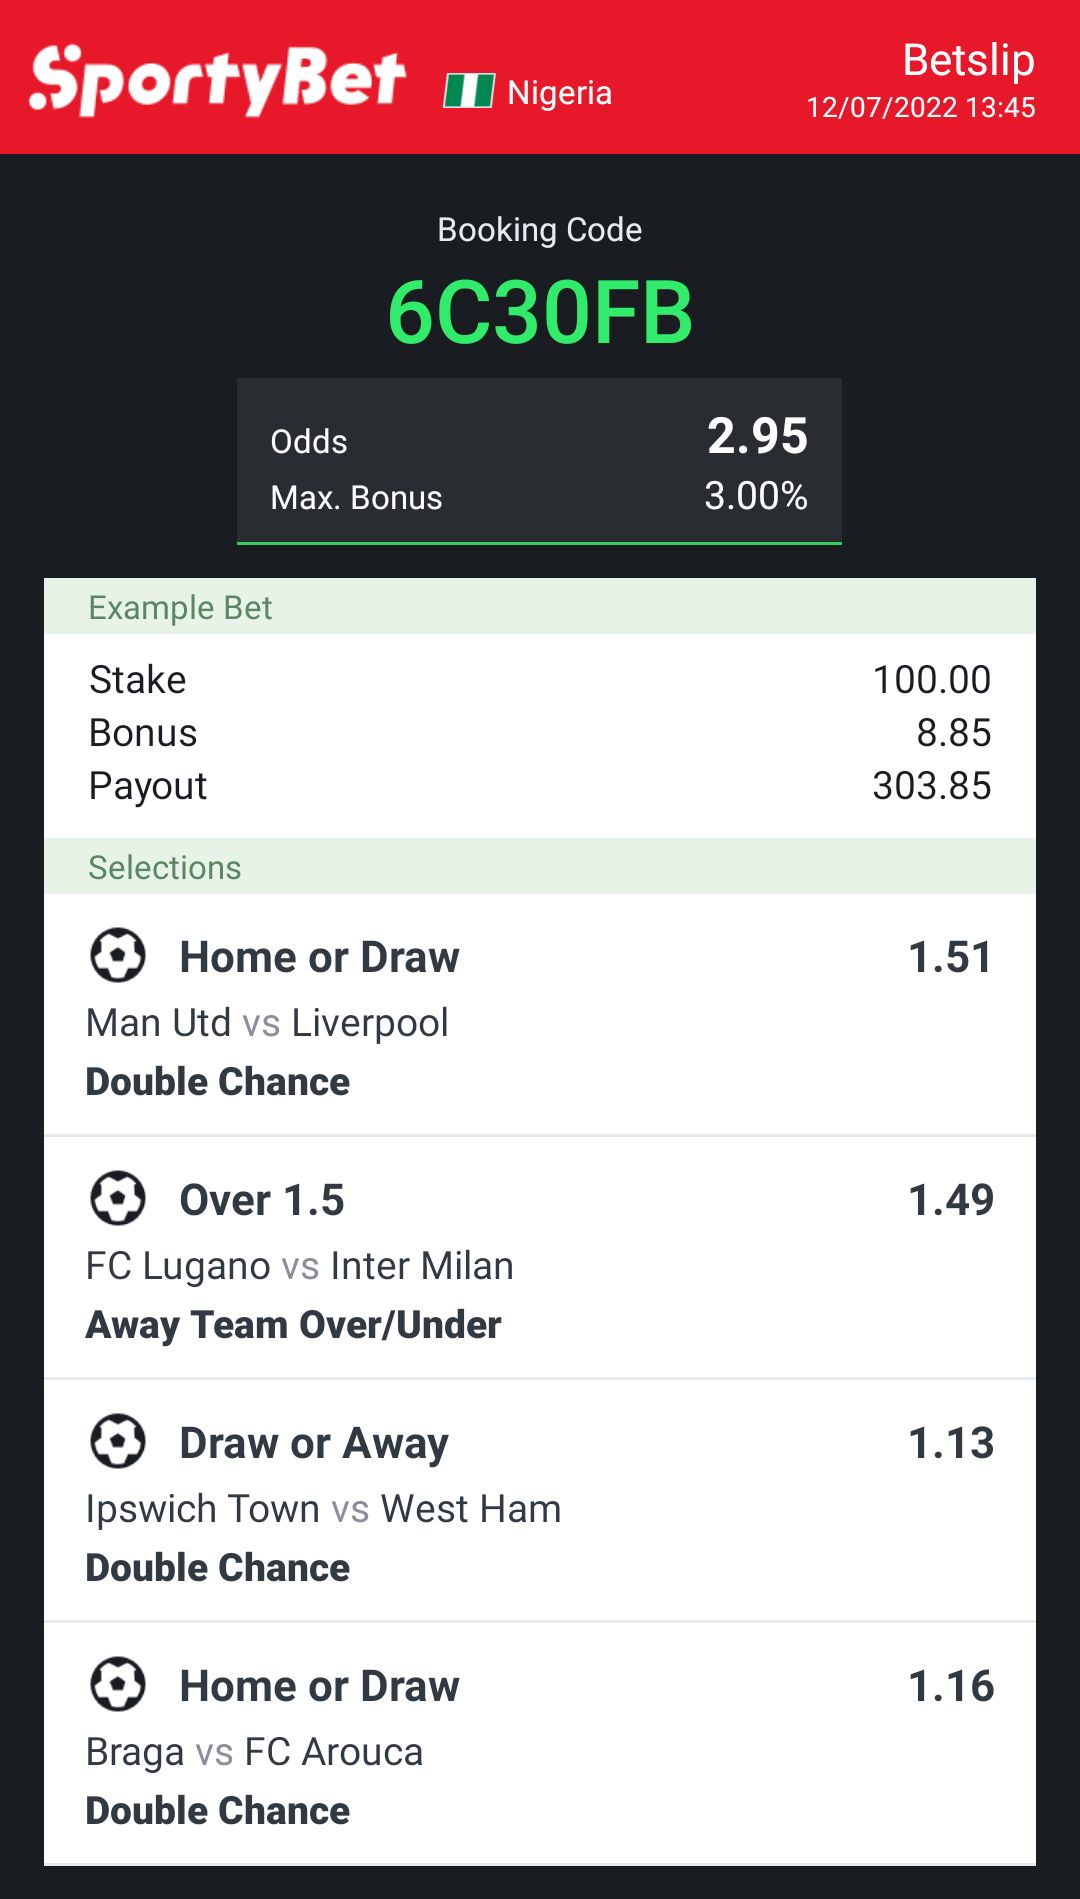 Bossolamilekan on X: Omo I don find one option and I'm making steady money  on it with inplay, I just watch the game and make money lol, join telegram  make i tell